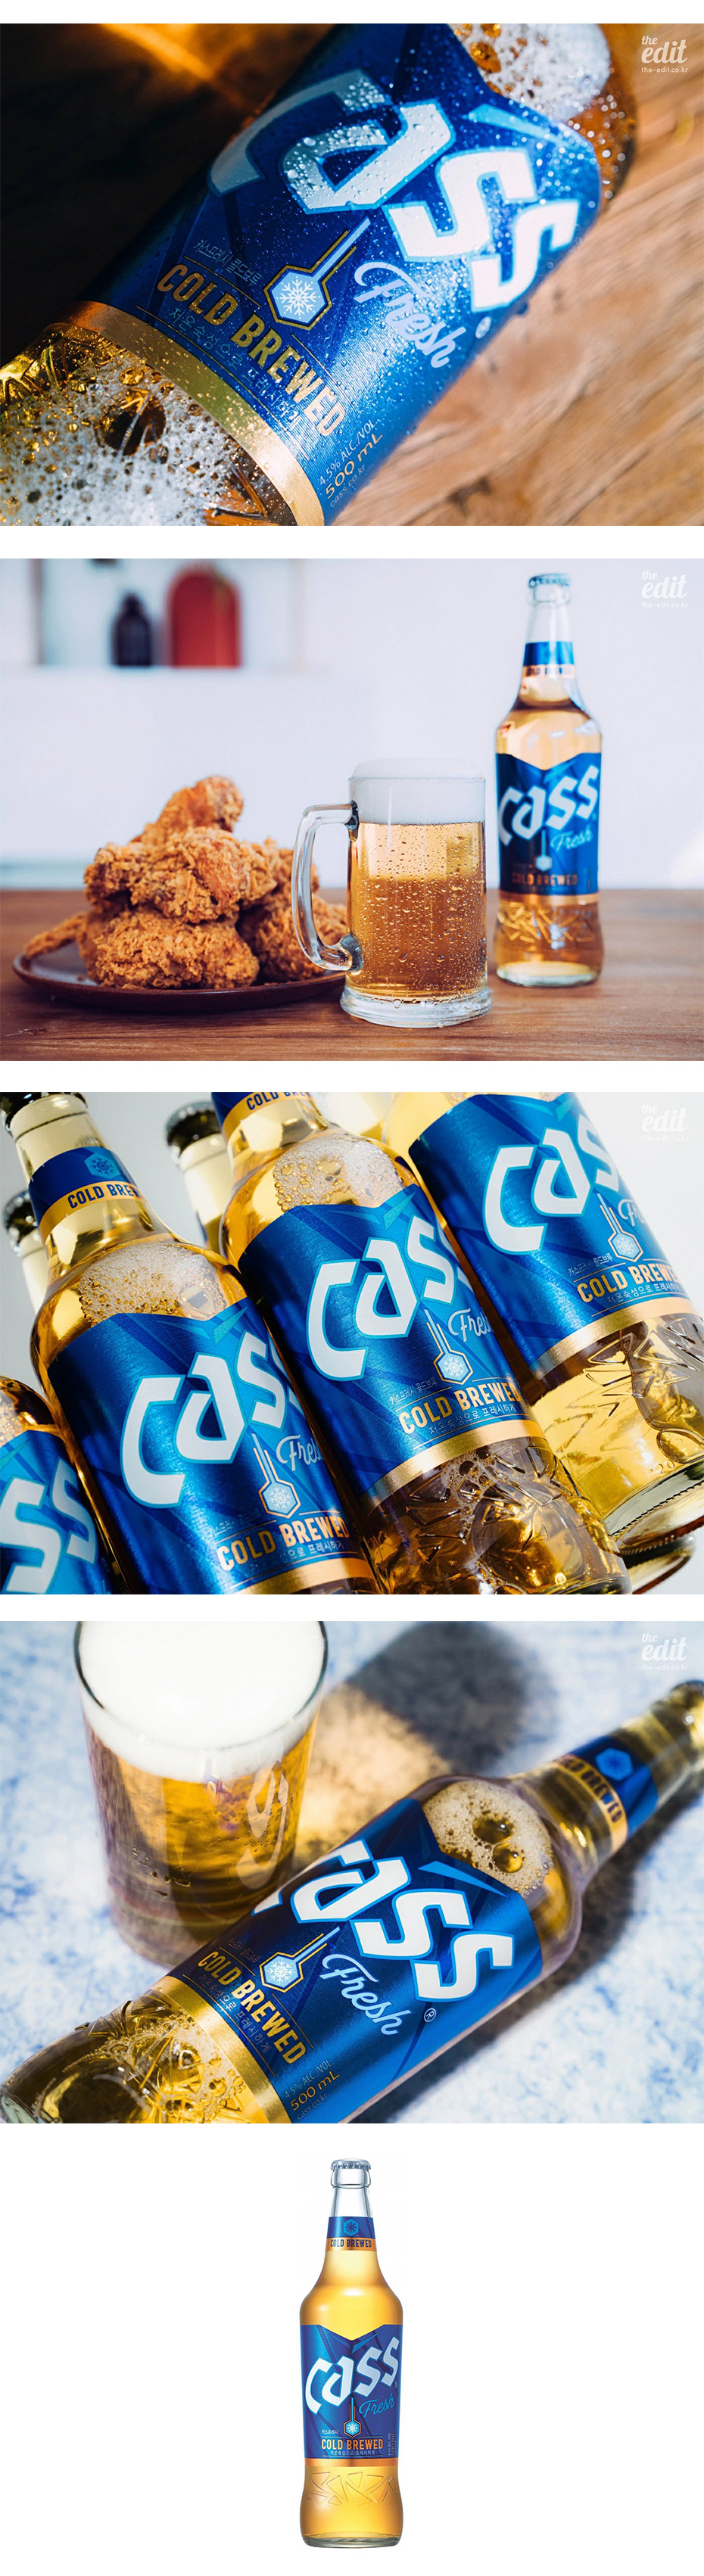 CASS カス瓶ビール 500ml